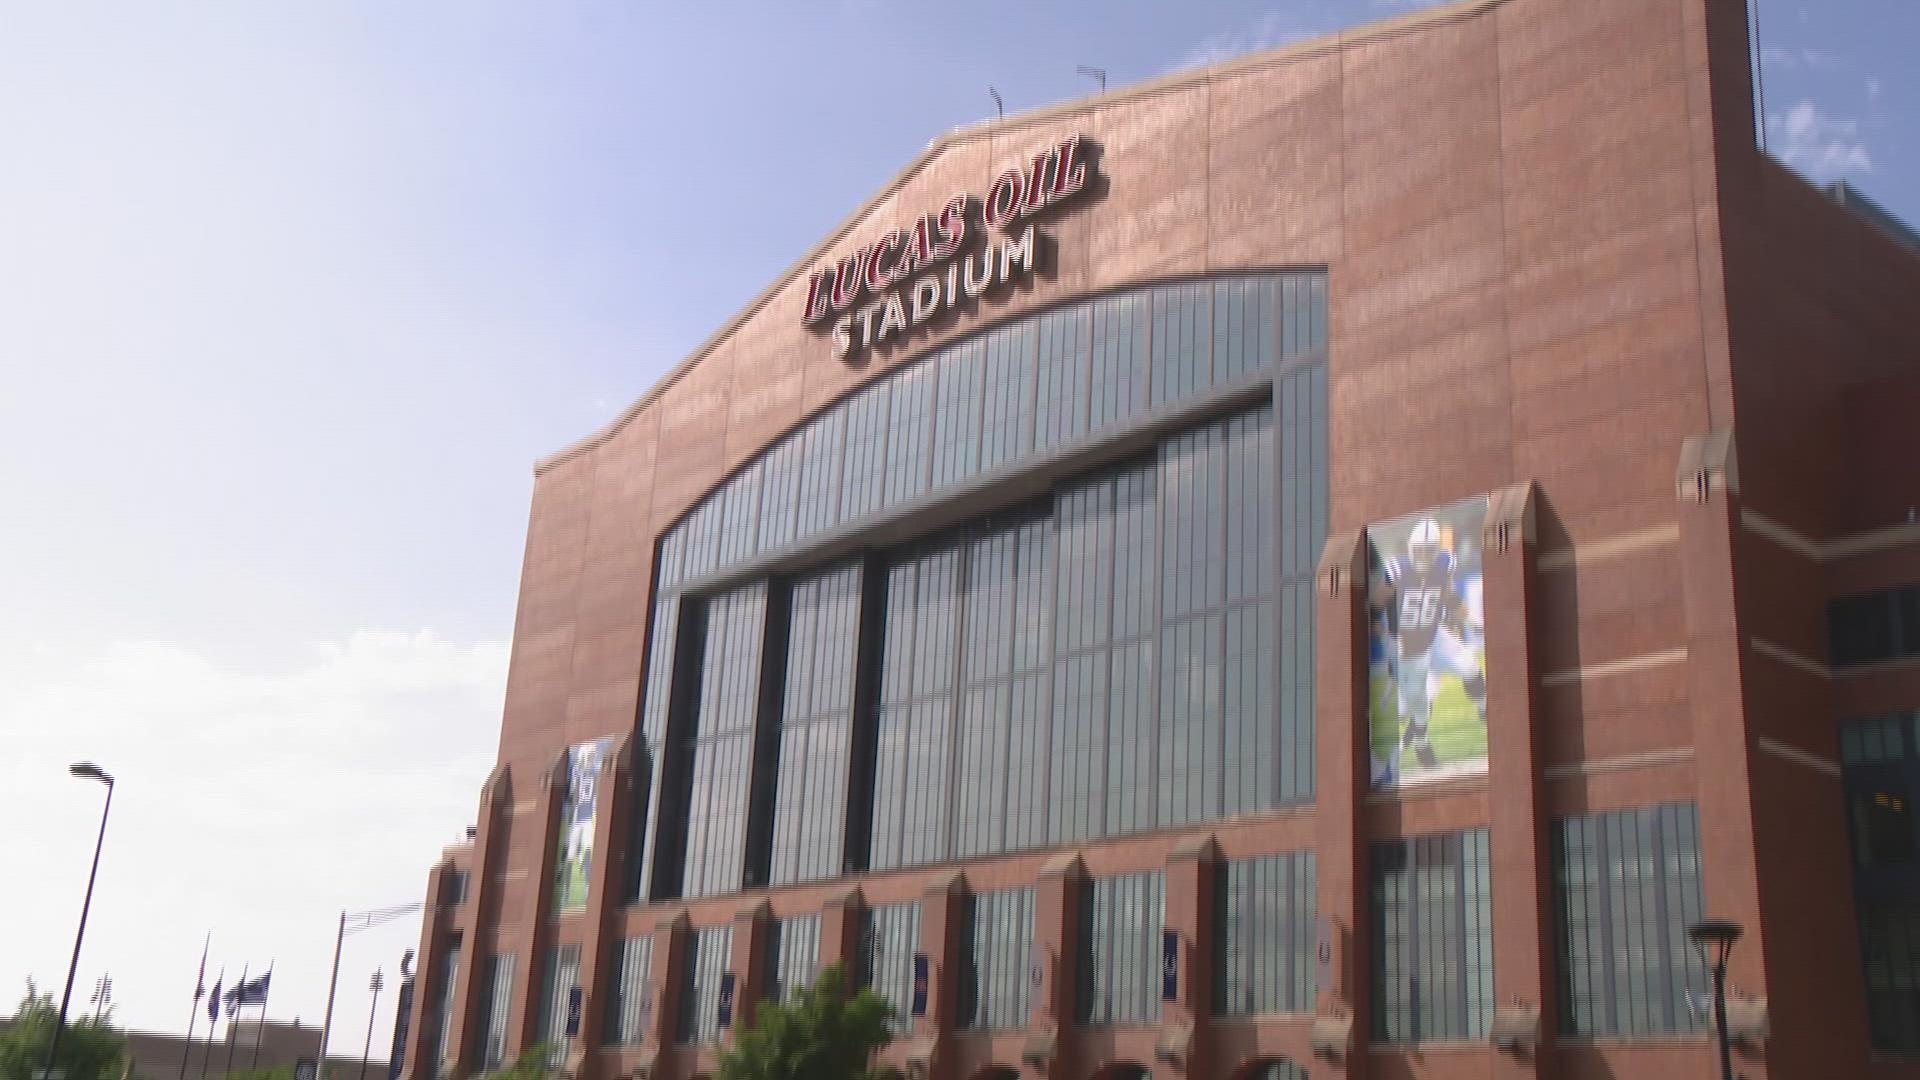 Dave Calabro has some insight into the plans underway at Lucas Oil Stadium.